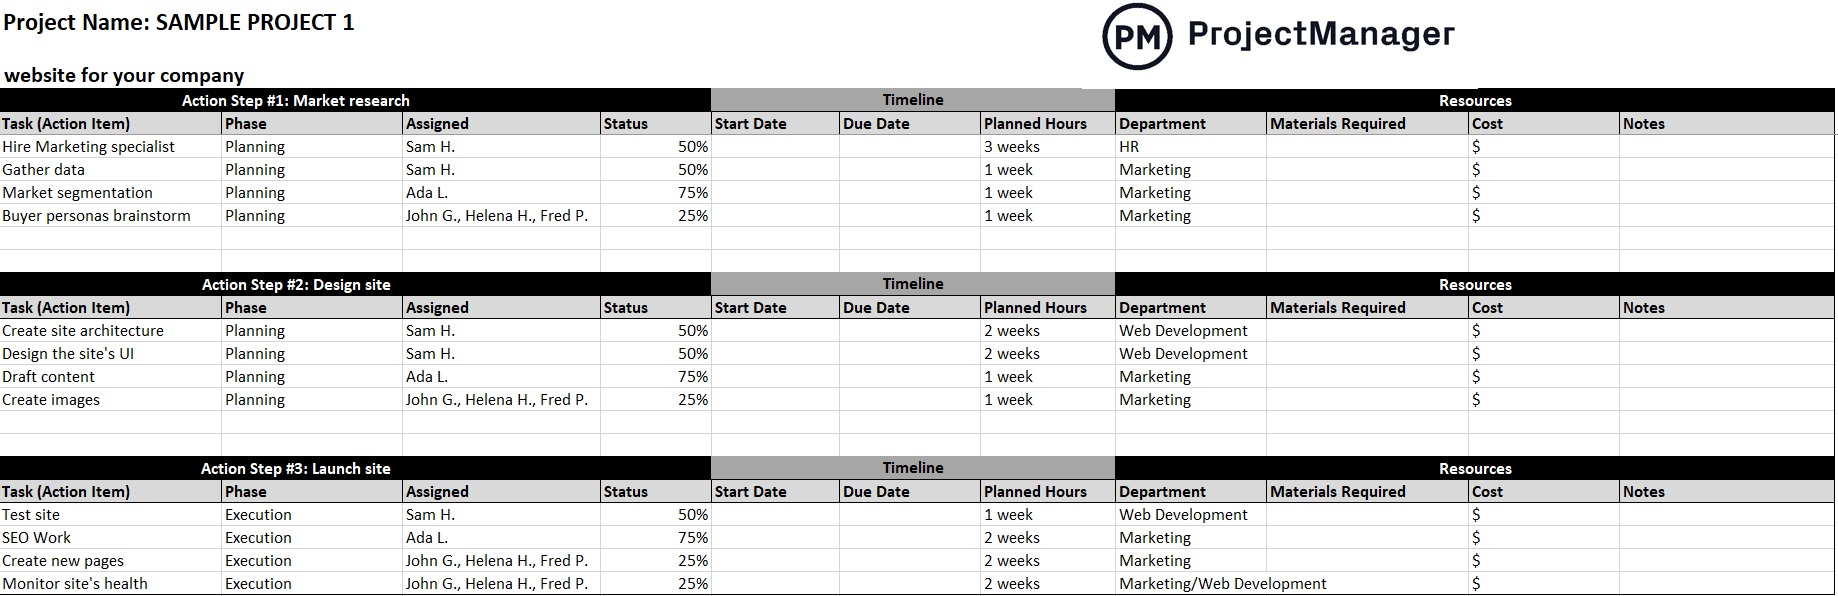 Free downloadable action plan template from ProjectManager